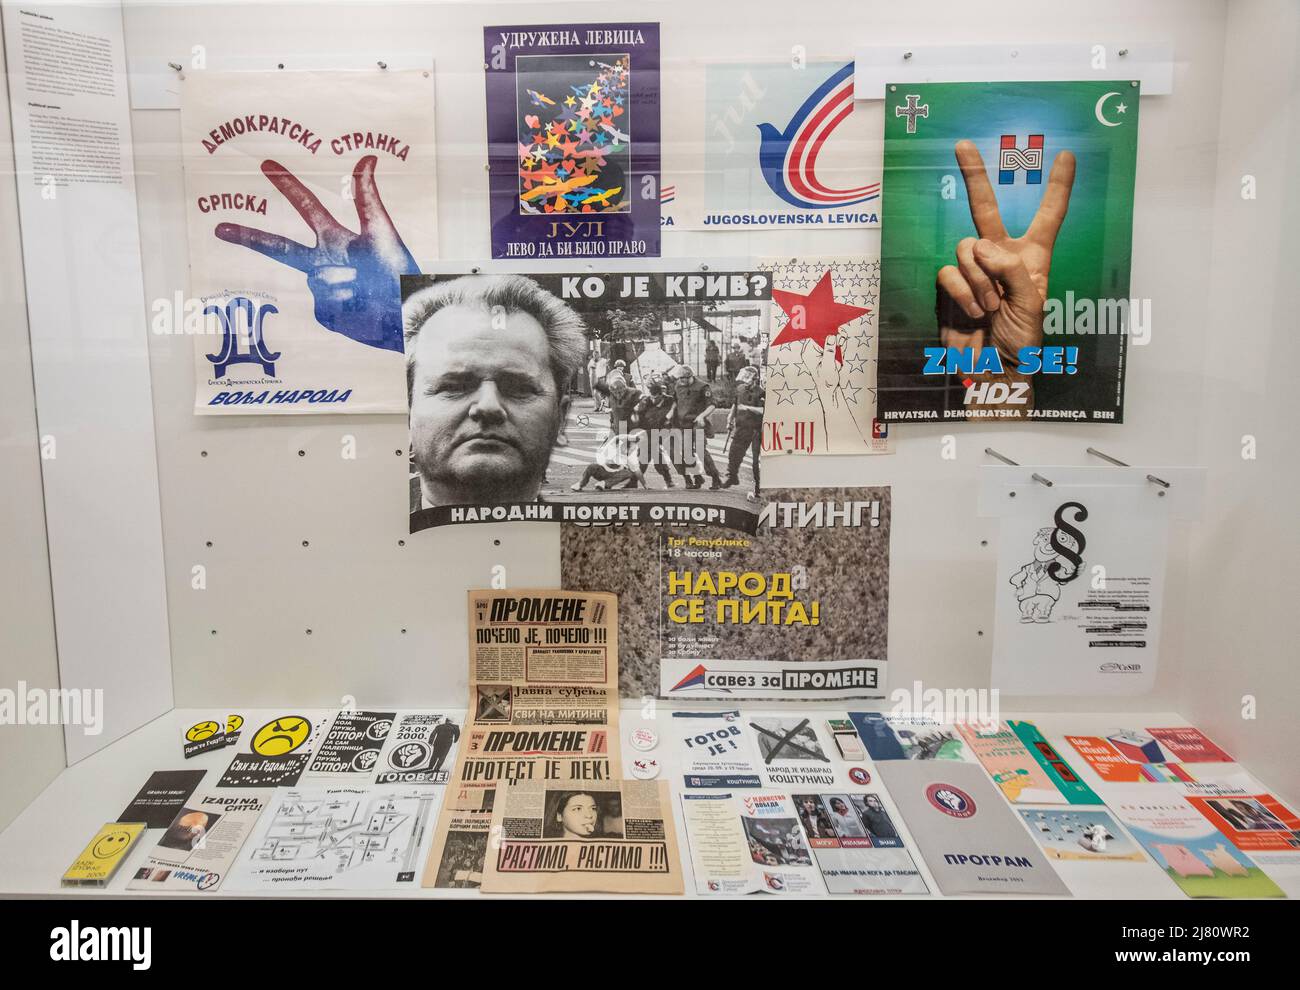 Political posters from elections of Yugoslavia in the 90s. Museum of Yugoslavia: Memorial Centre - Josip Broz Tito Fund. Stock Photo